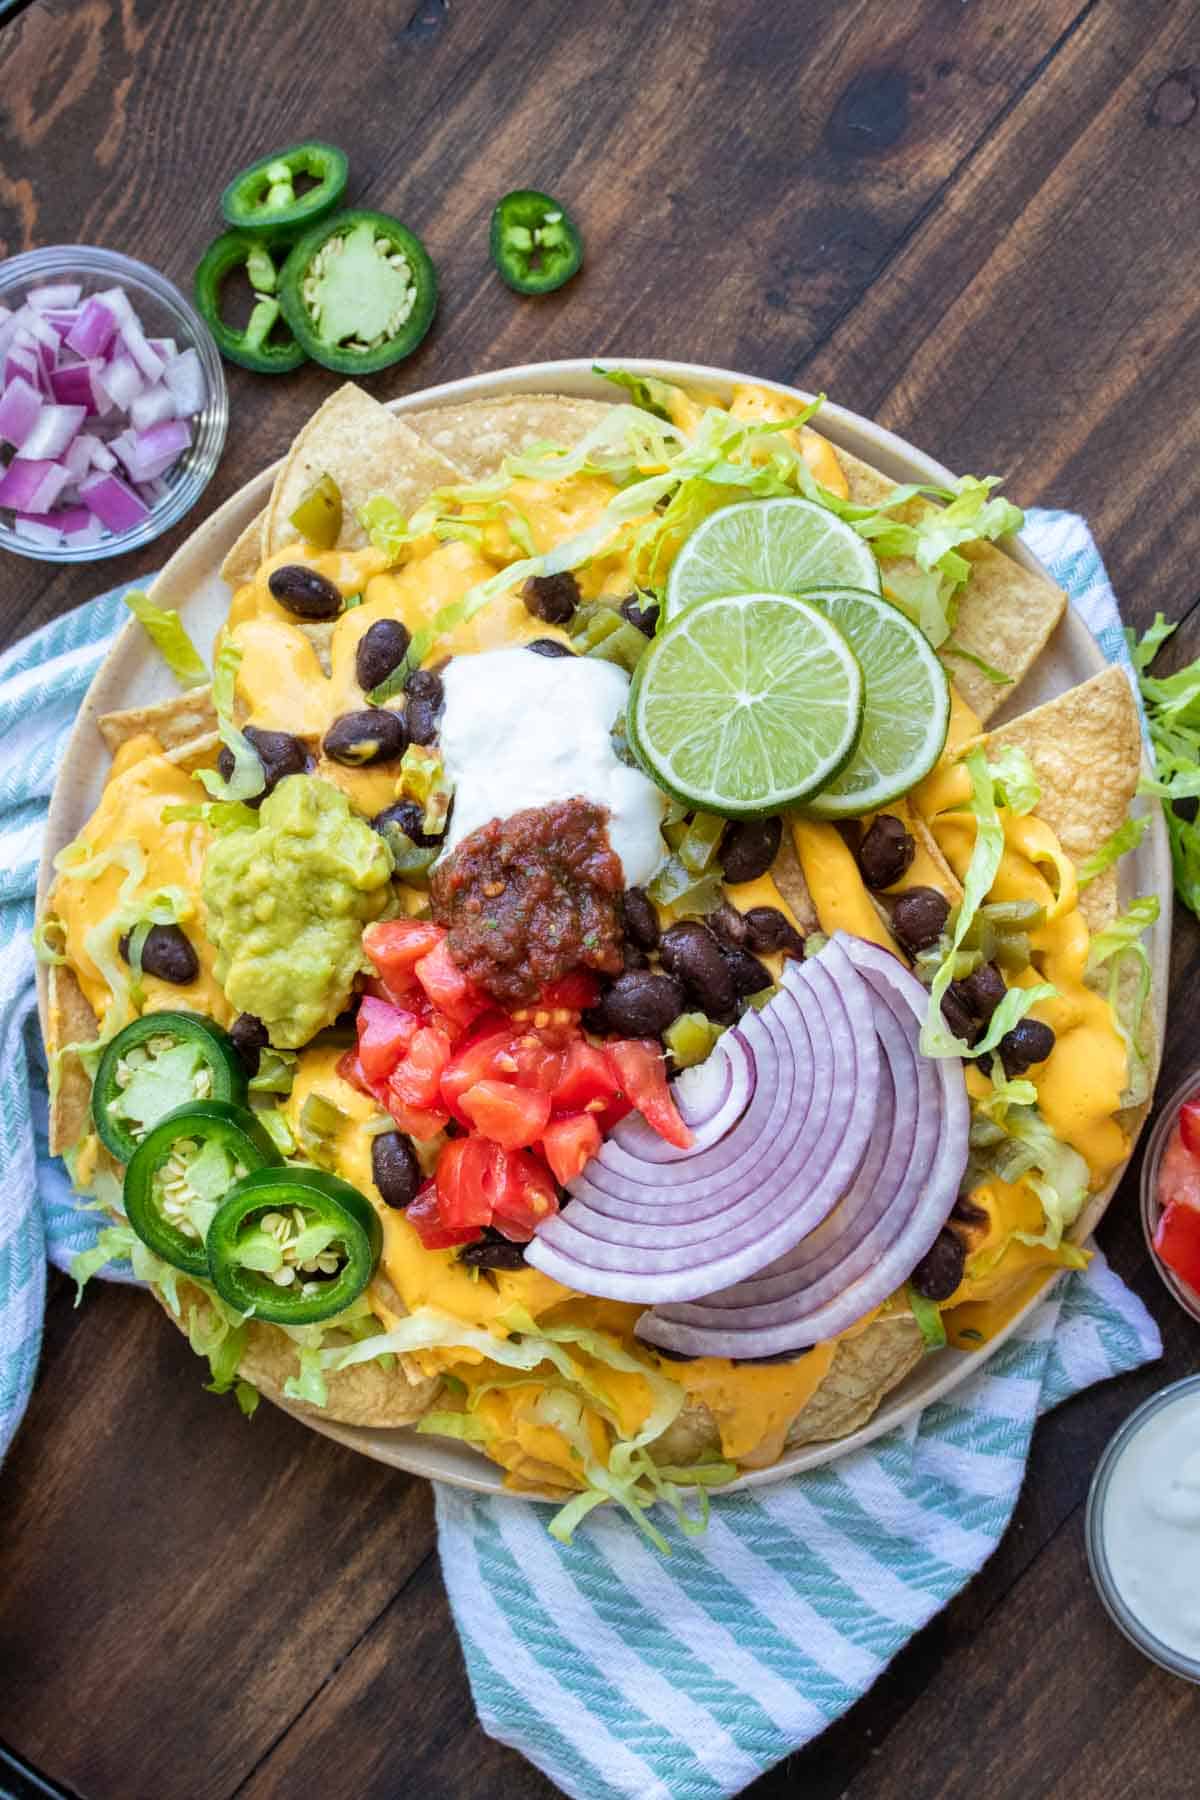 Fully loaded nachos on a tan plate resting on a striped napkin